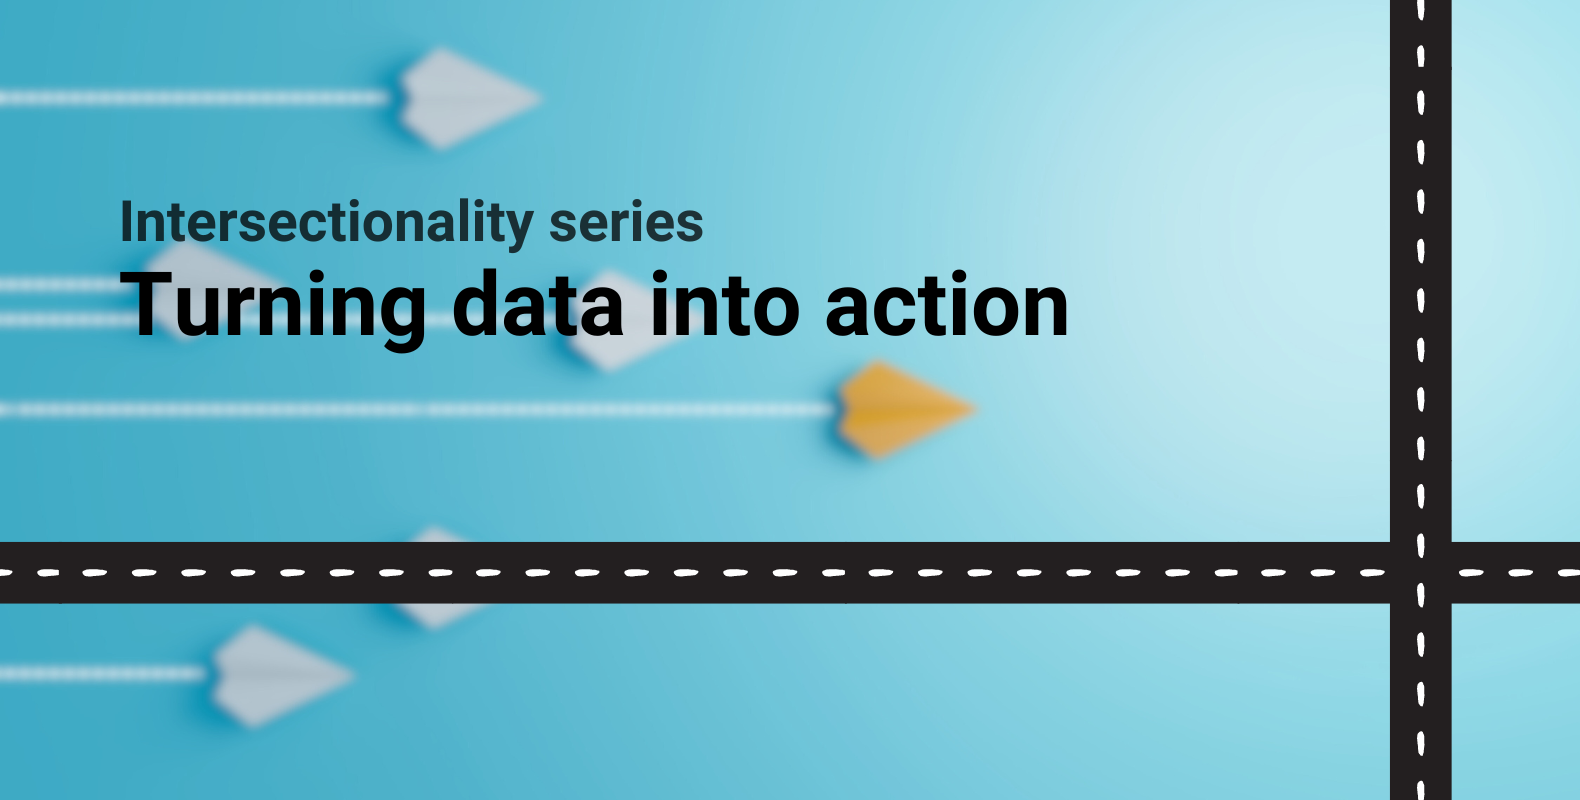 Turning data into action